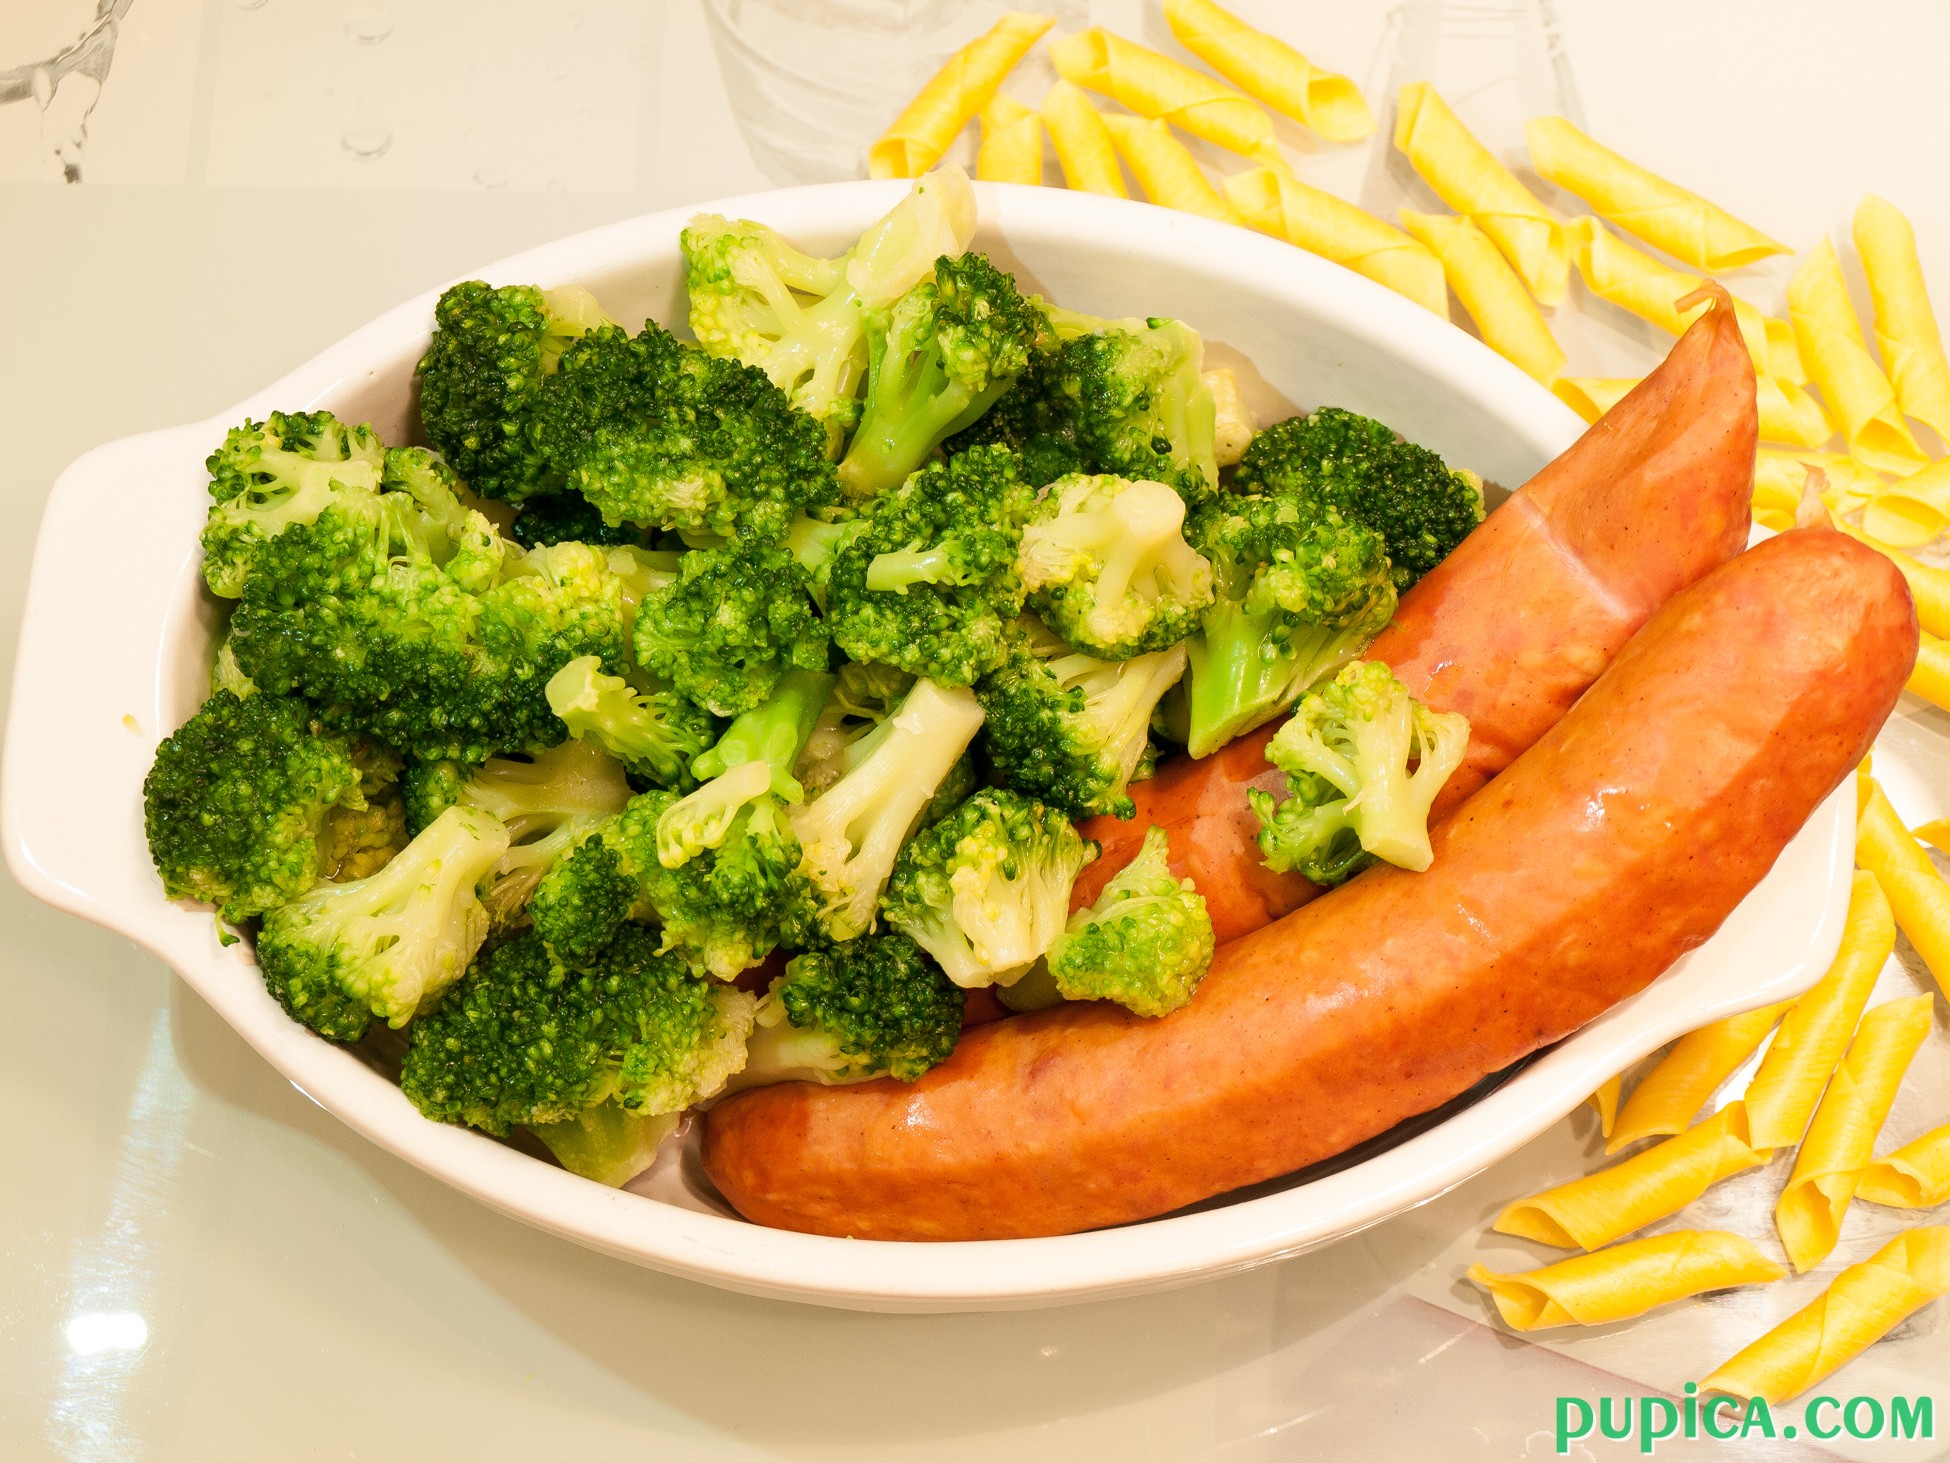 Pasta with Broccoli and Sausage